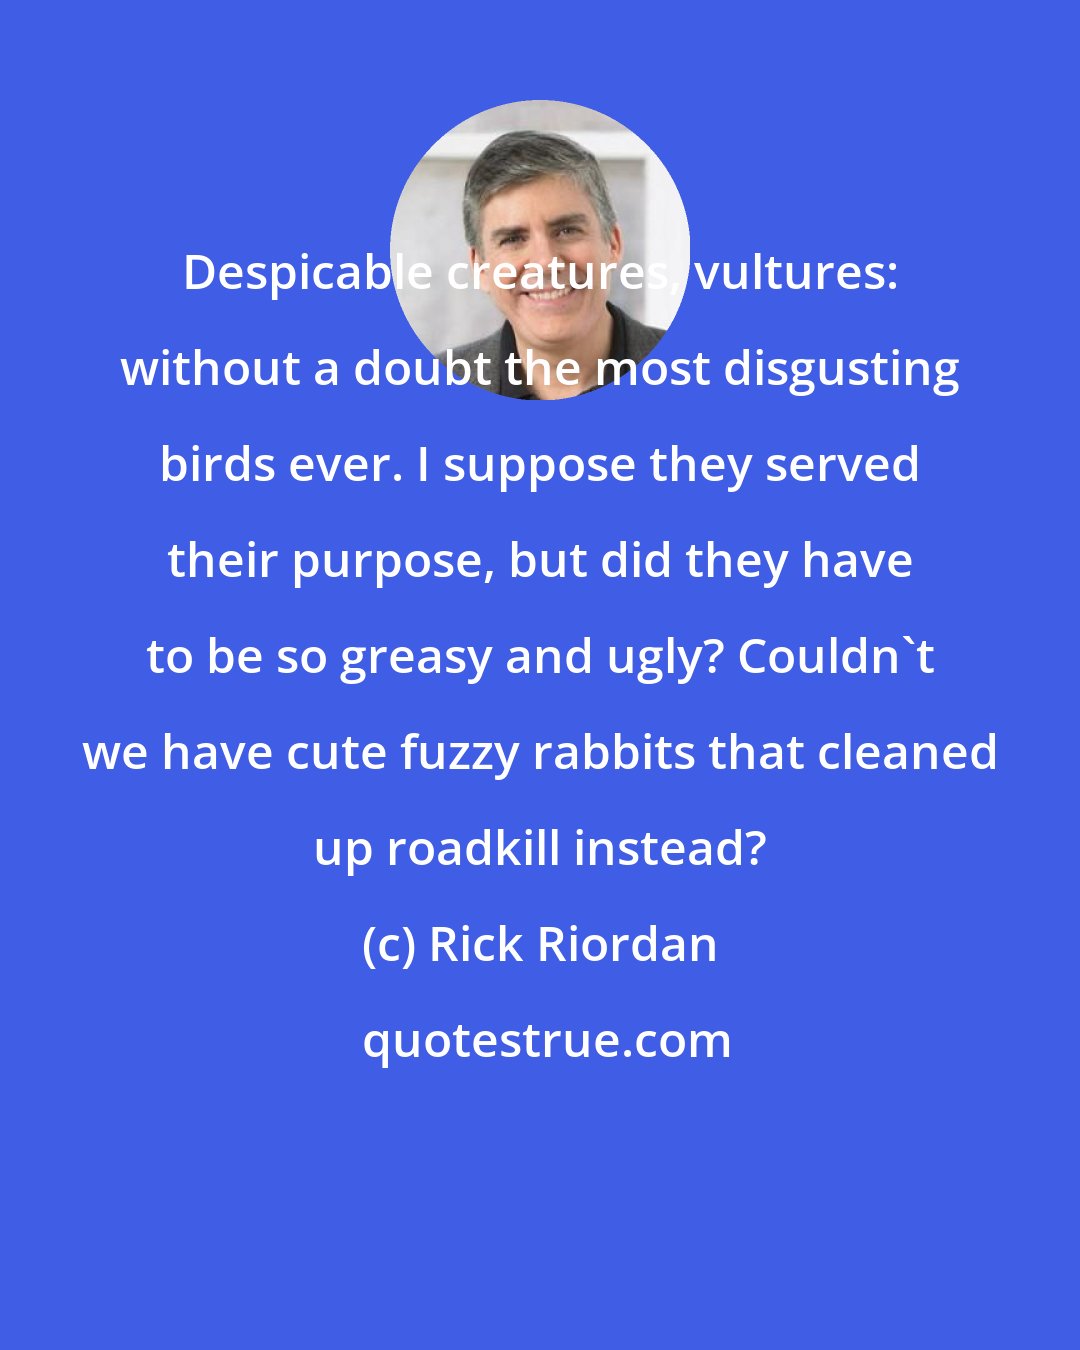 Rick Riordan: Despicable creatures, vultures: without a doubt the most disgusting birds ever. I suppose they served their purpose, but did they have to be so greasy and ugly? Couldn't we have cute fuzzy rabbits that cleaned up roadkill instead?